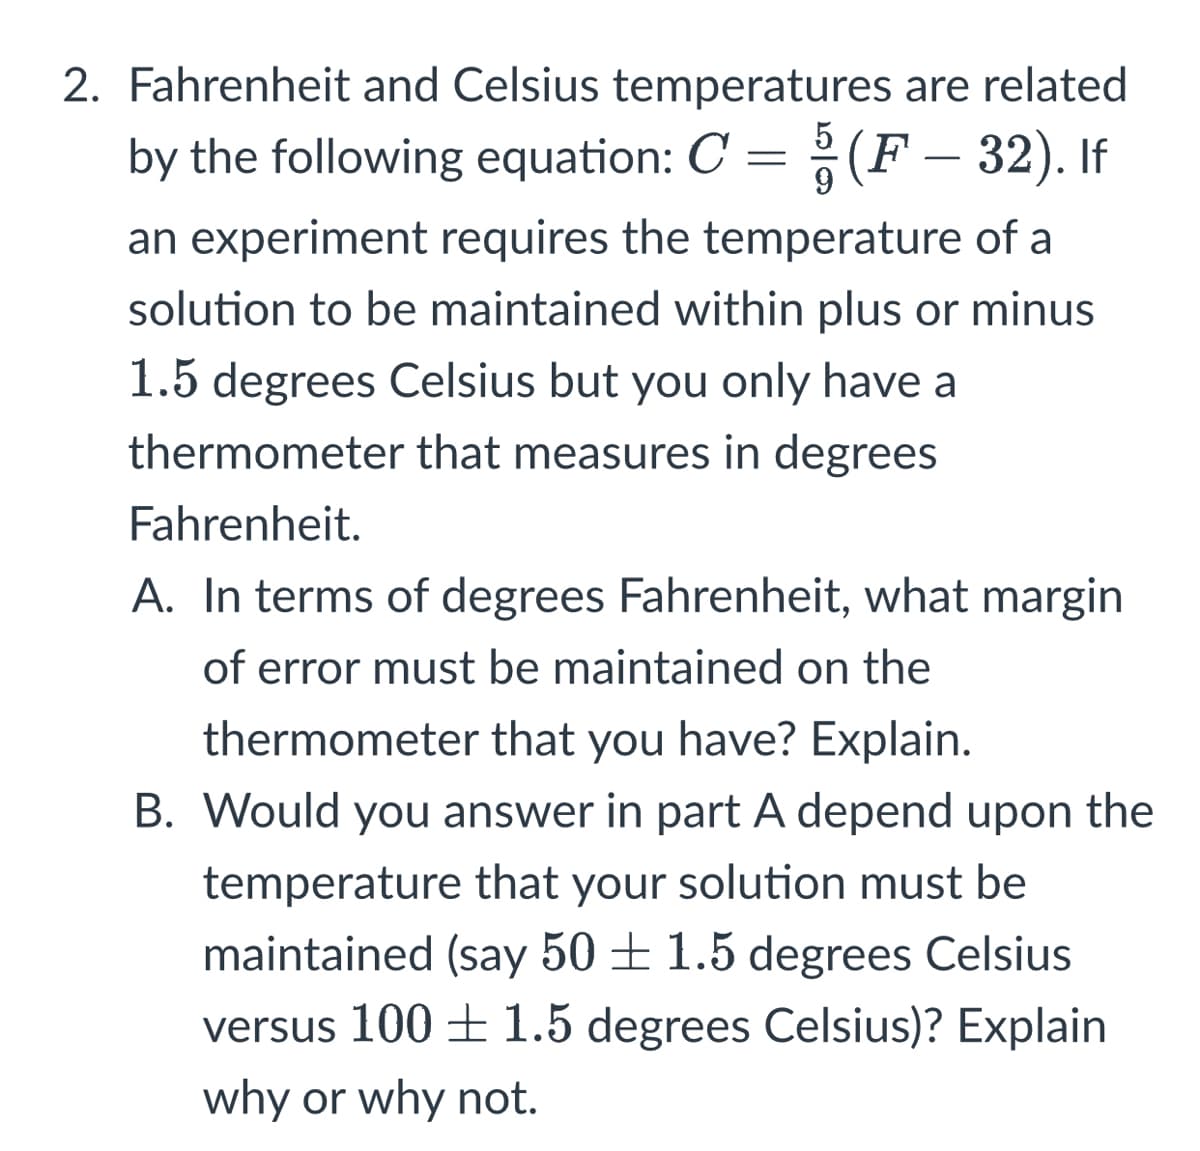 9
2. Fahrenheit and Celsius temperatures are related
by the following equation: C = § (F – 32). If
an experiment requires the temperature of a
solution to be maintained within plus or minus
1.5 degrees Celsius but you only have a
thermometer that measures in degrees
Fahrenheit.
A. In terms of degrees Fahrenheit, what margin
of error must be maintained on the
thermometer that you have? Explain.
B. Would you answer in part A depend upon the
temperature that your solution must be
maintained (say 50+ 1.5 degrees Celsius
versus 100 ± 1.5 degrees Celsius)? Explain
why or why not.